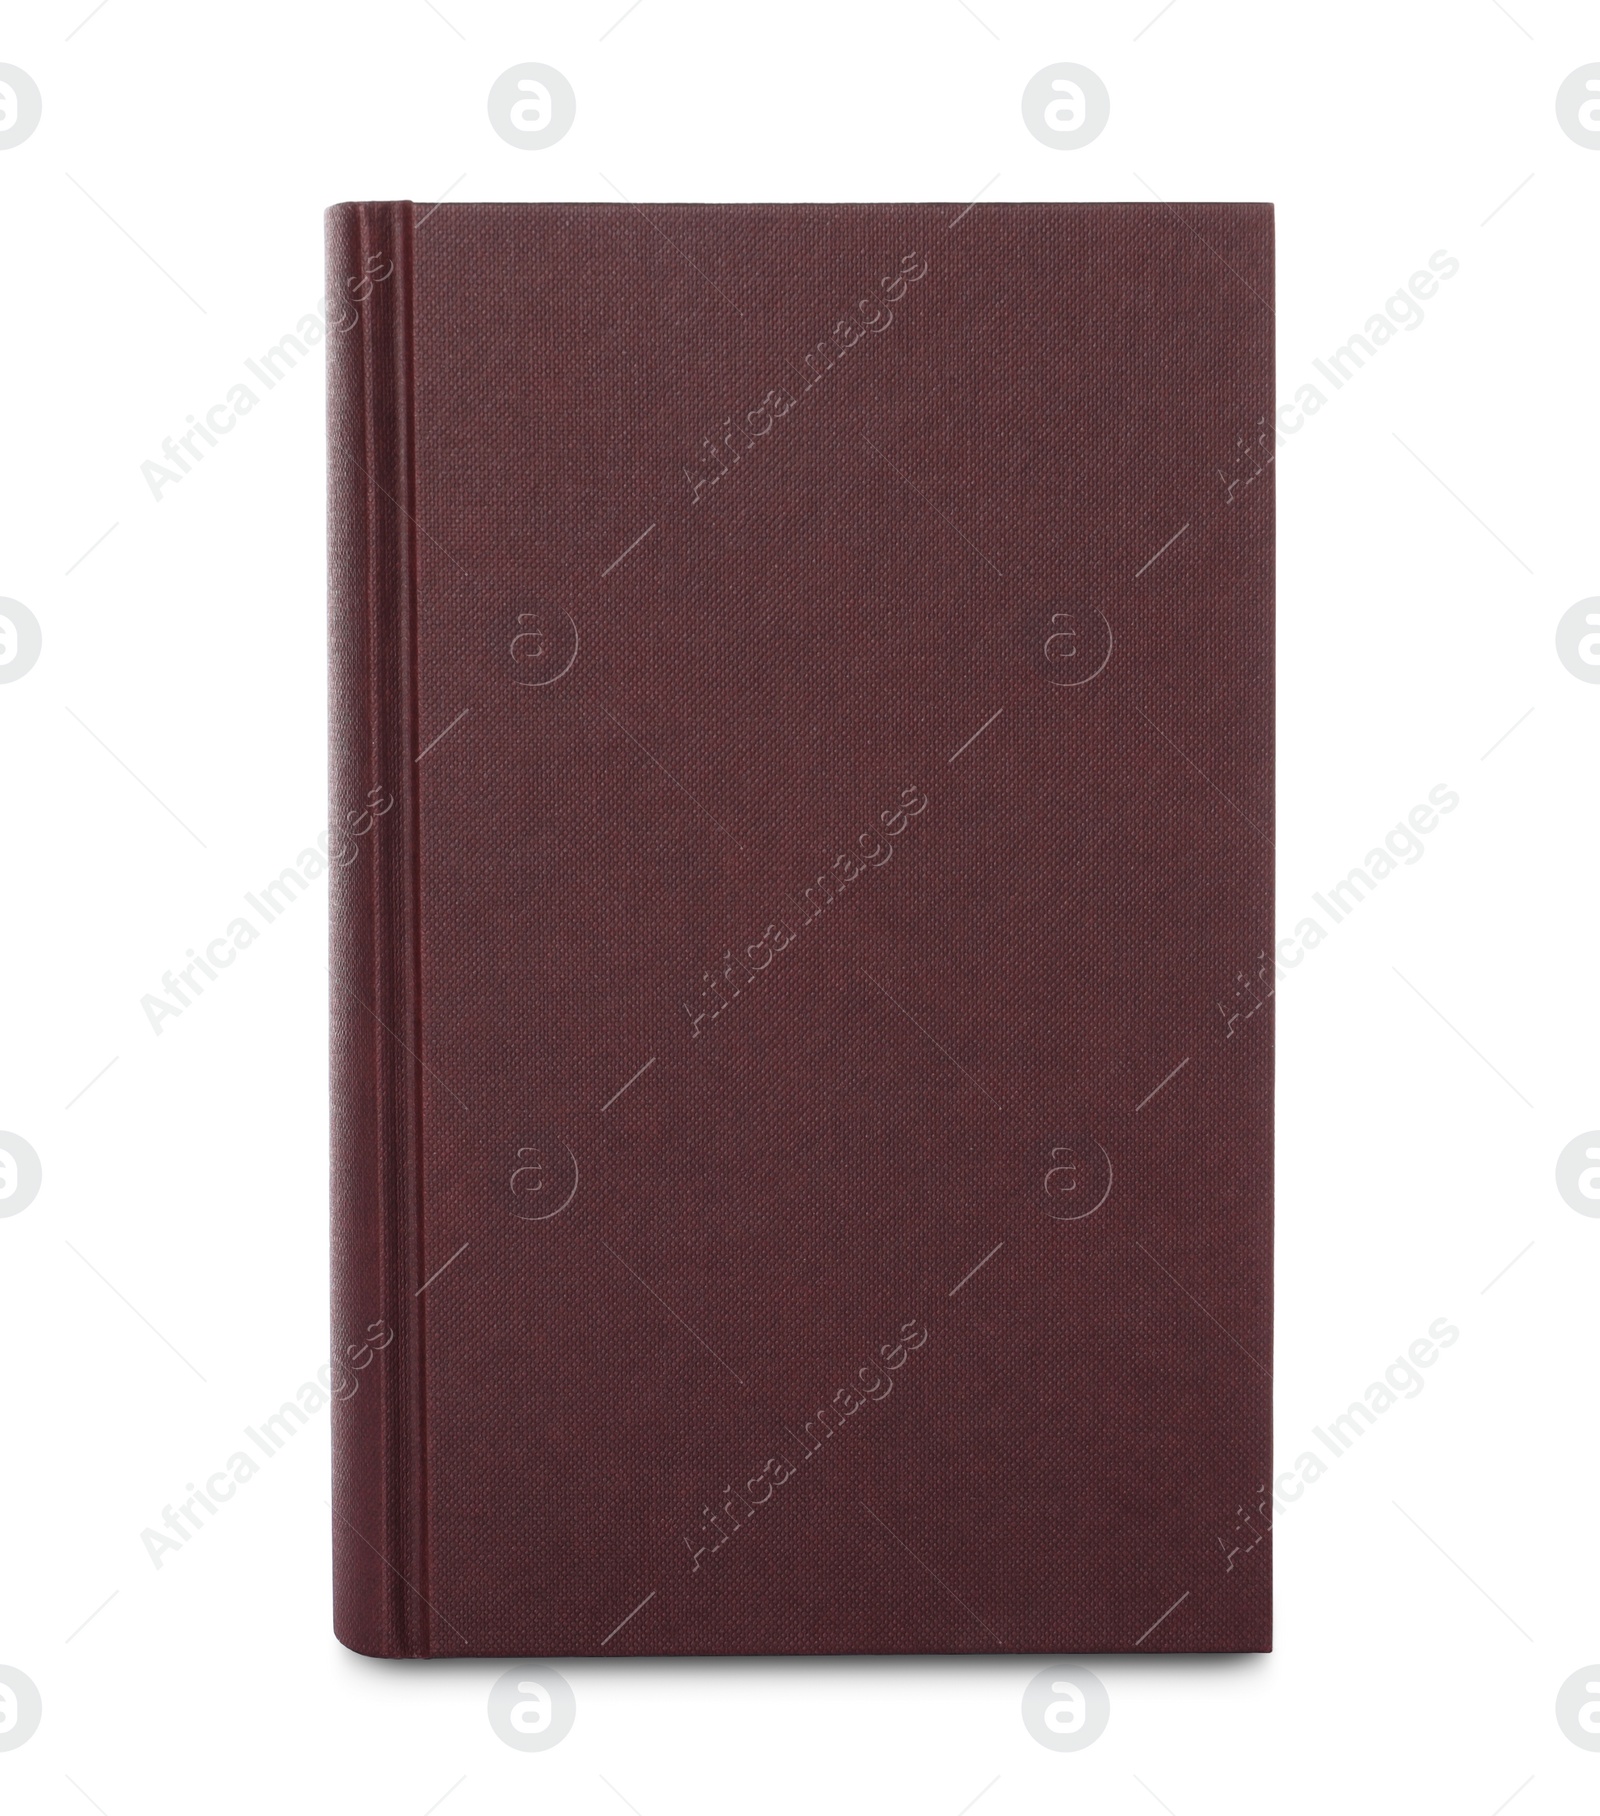 Photo of Closed book with brown hard cover isolated on white